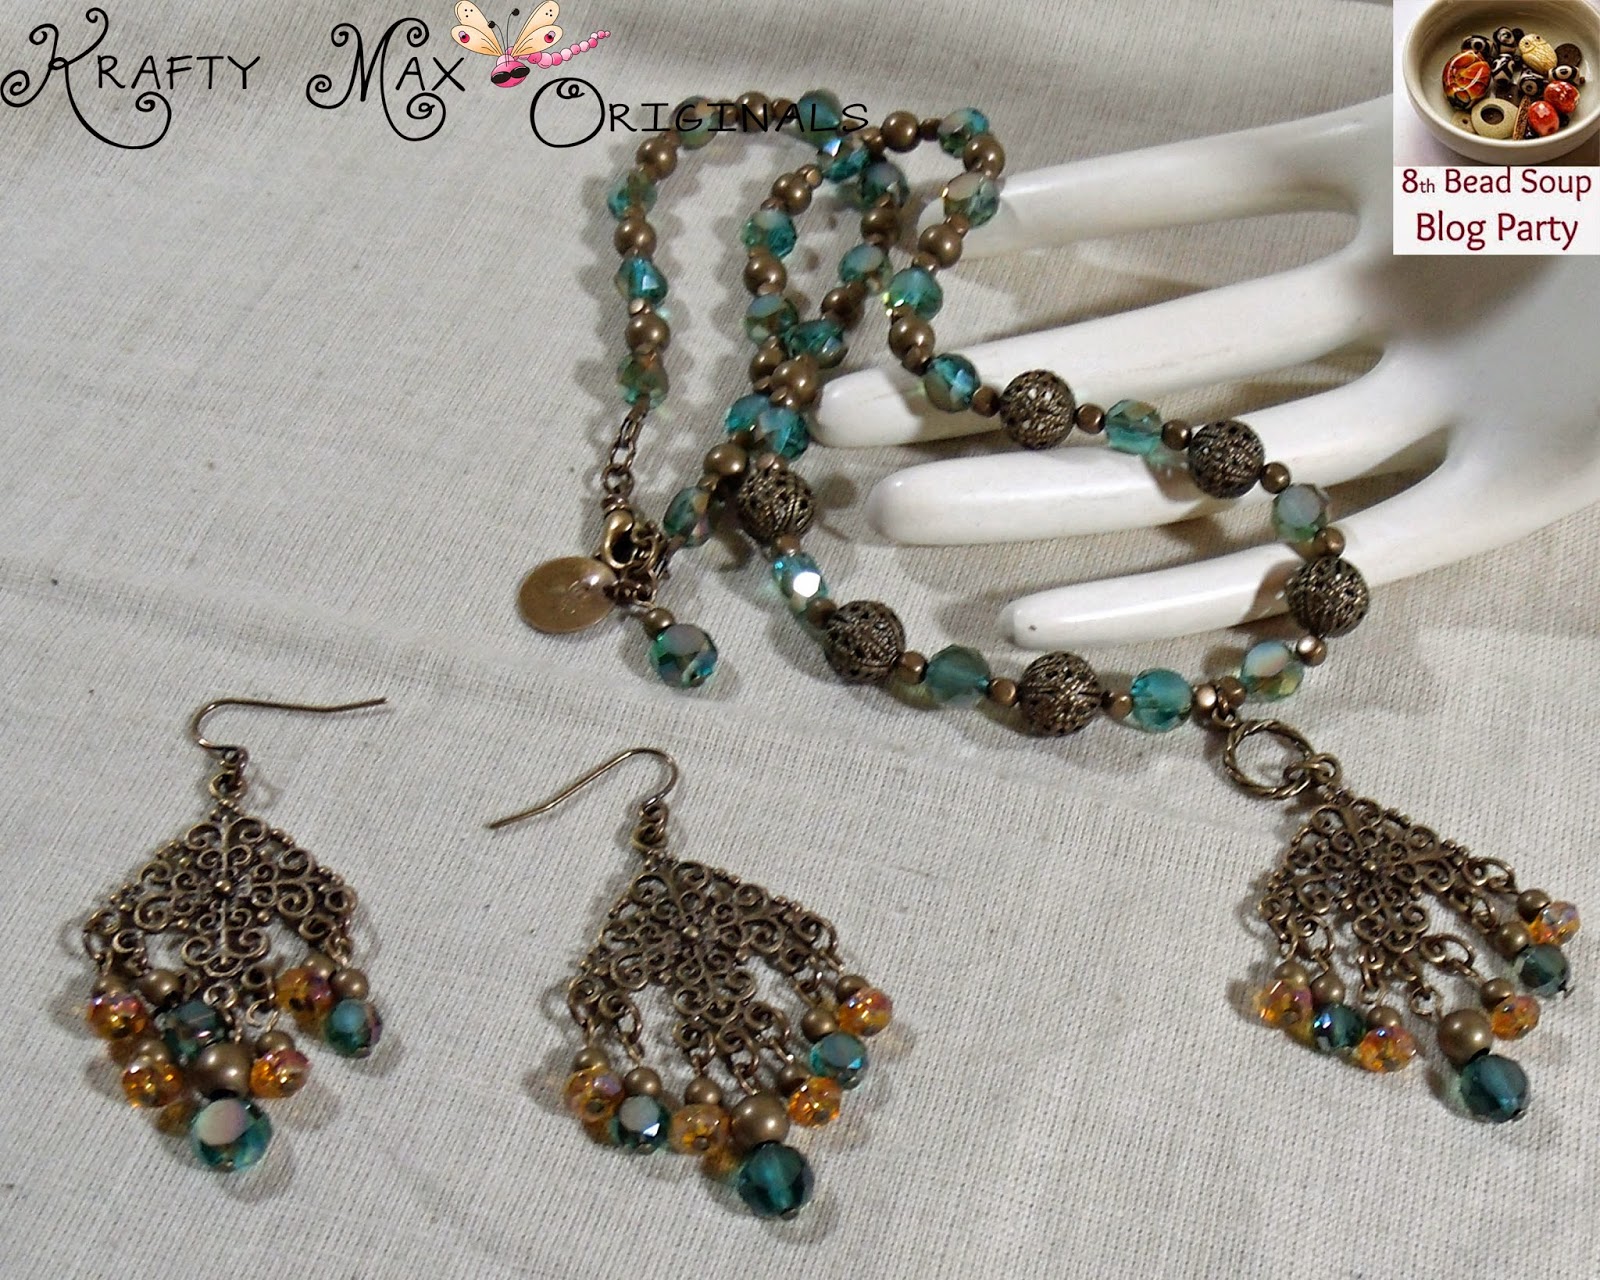 http://www.artfire.com/ext/shop/product_view/KraftyMax/9277181/8th_bead_soup_blog_party_-_teal_fan_dangle_neclace_and_earrings/handmade/jewelry/sets/crystal#